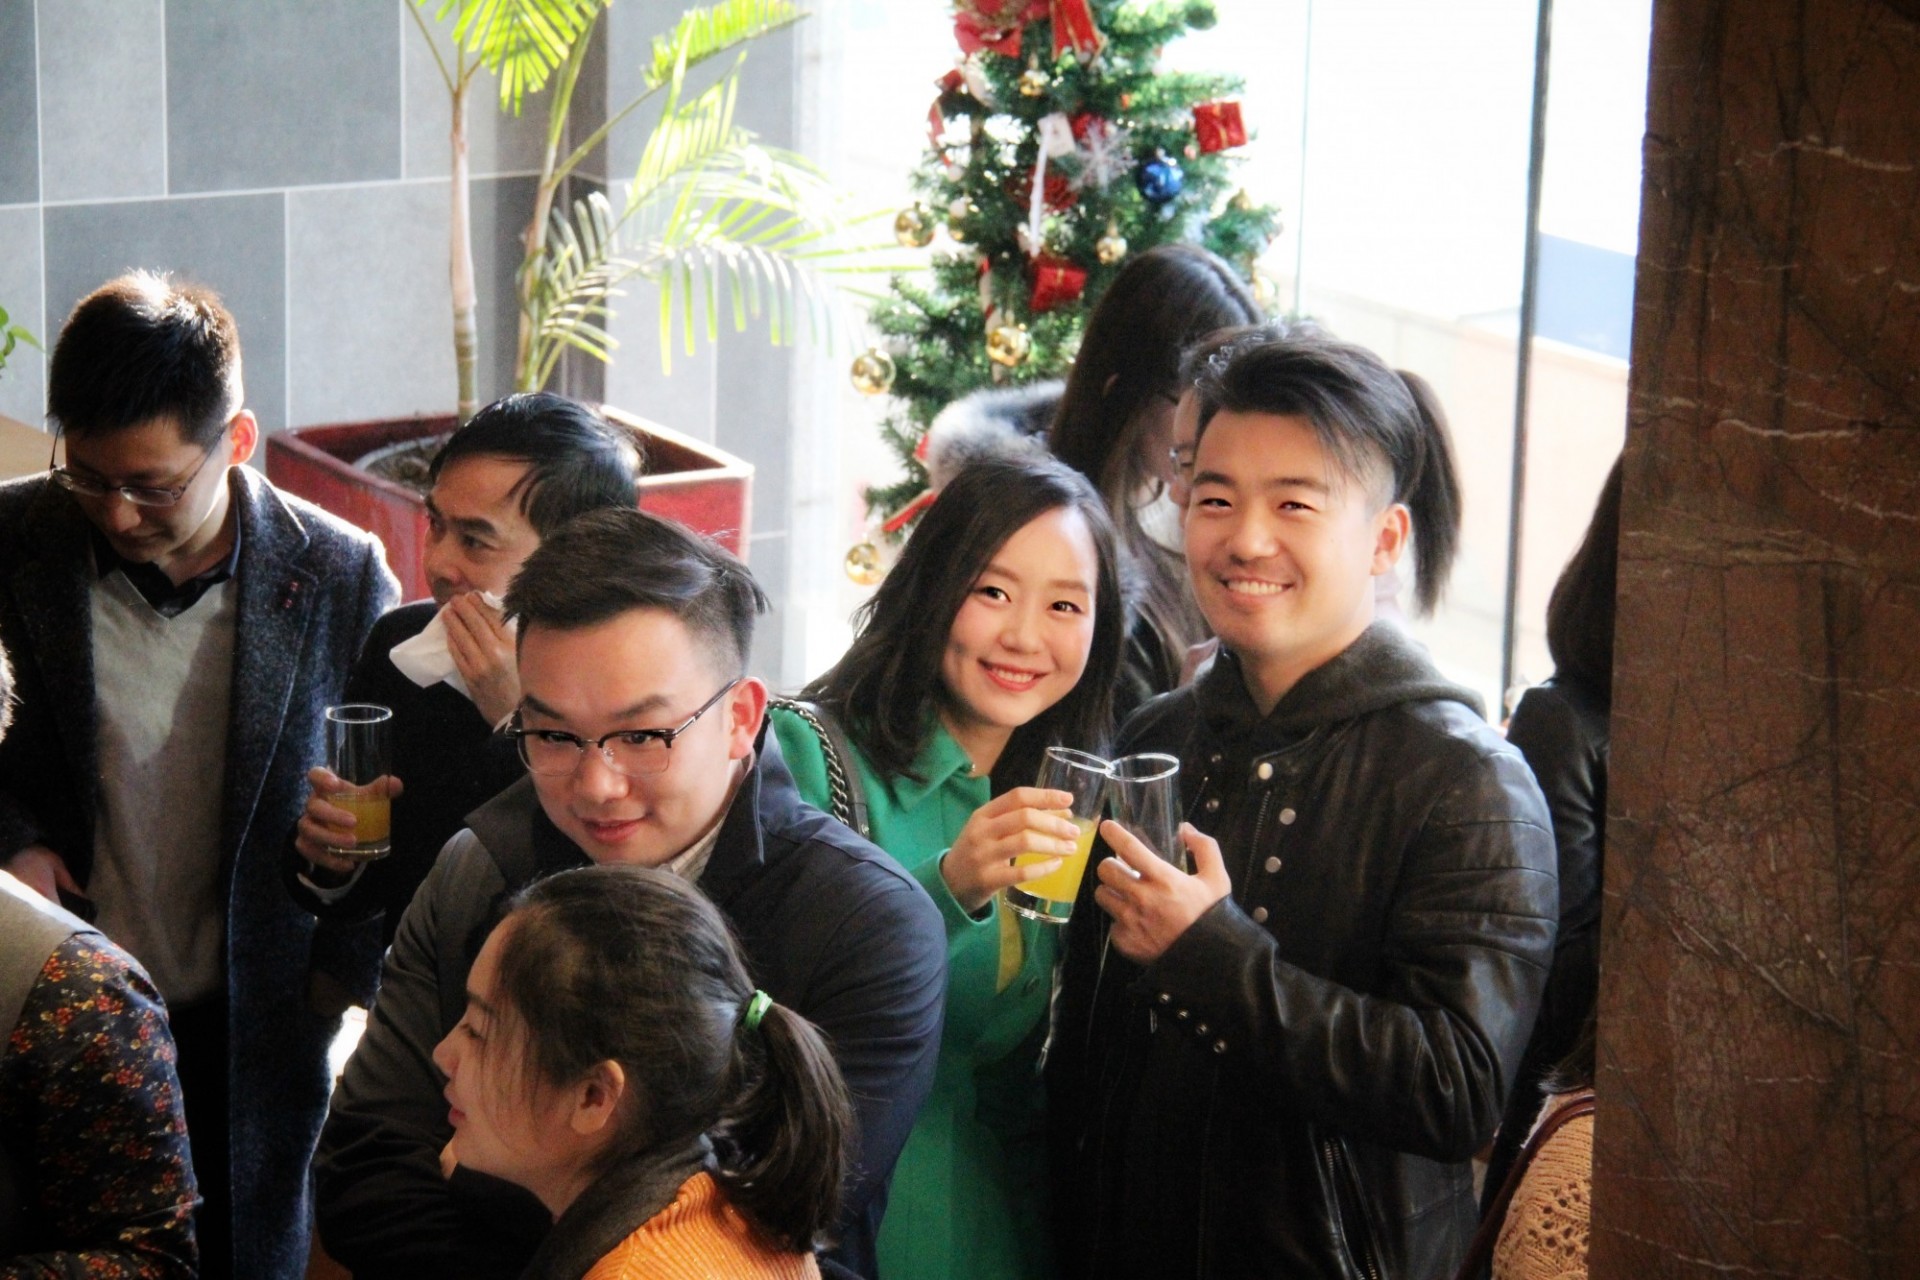 2017 Alumni Holiday Reception at Columbia Global Centers | Beijing